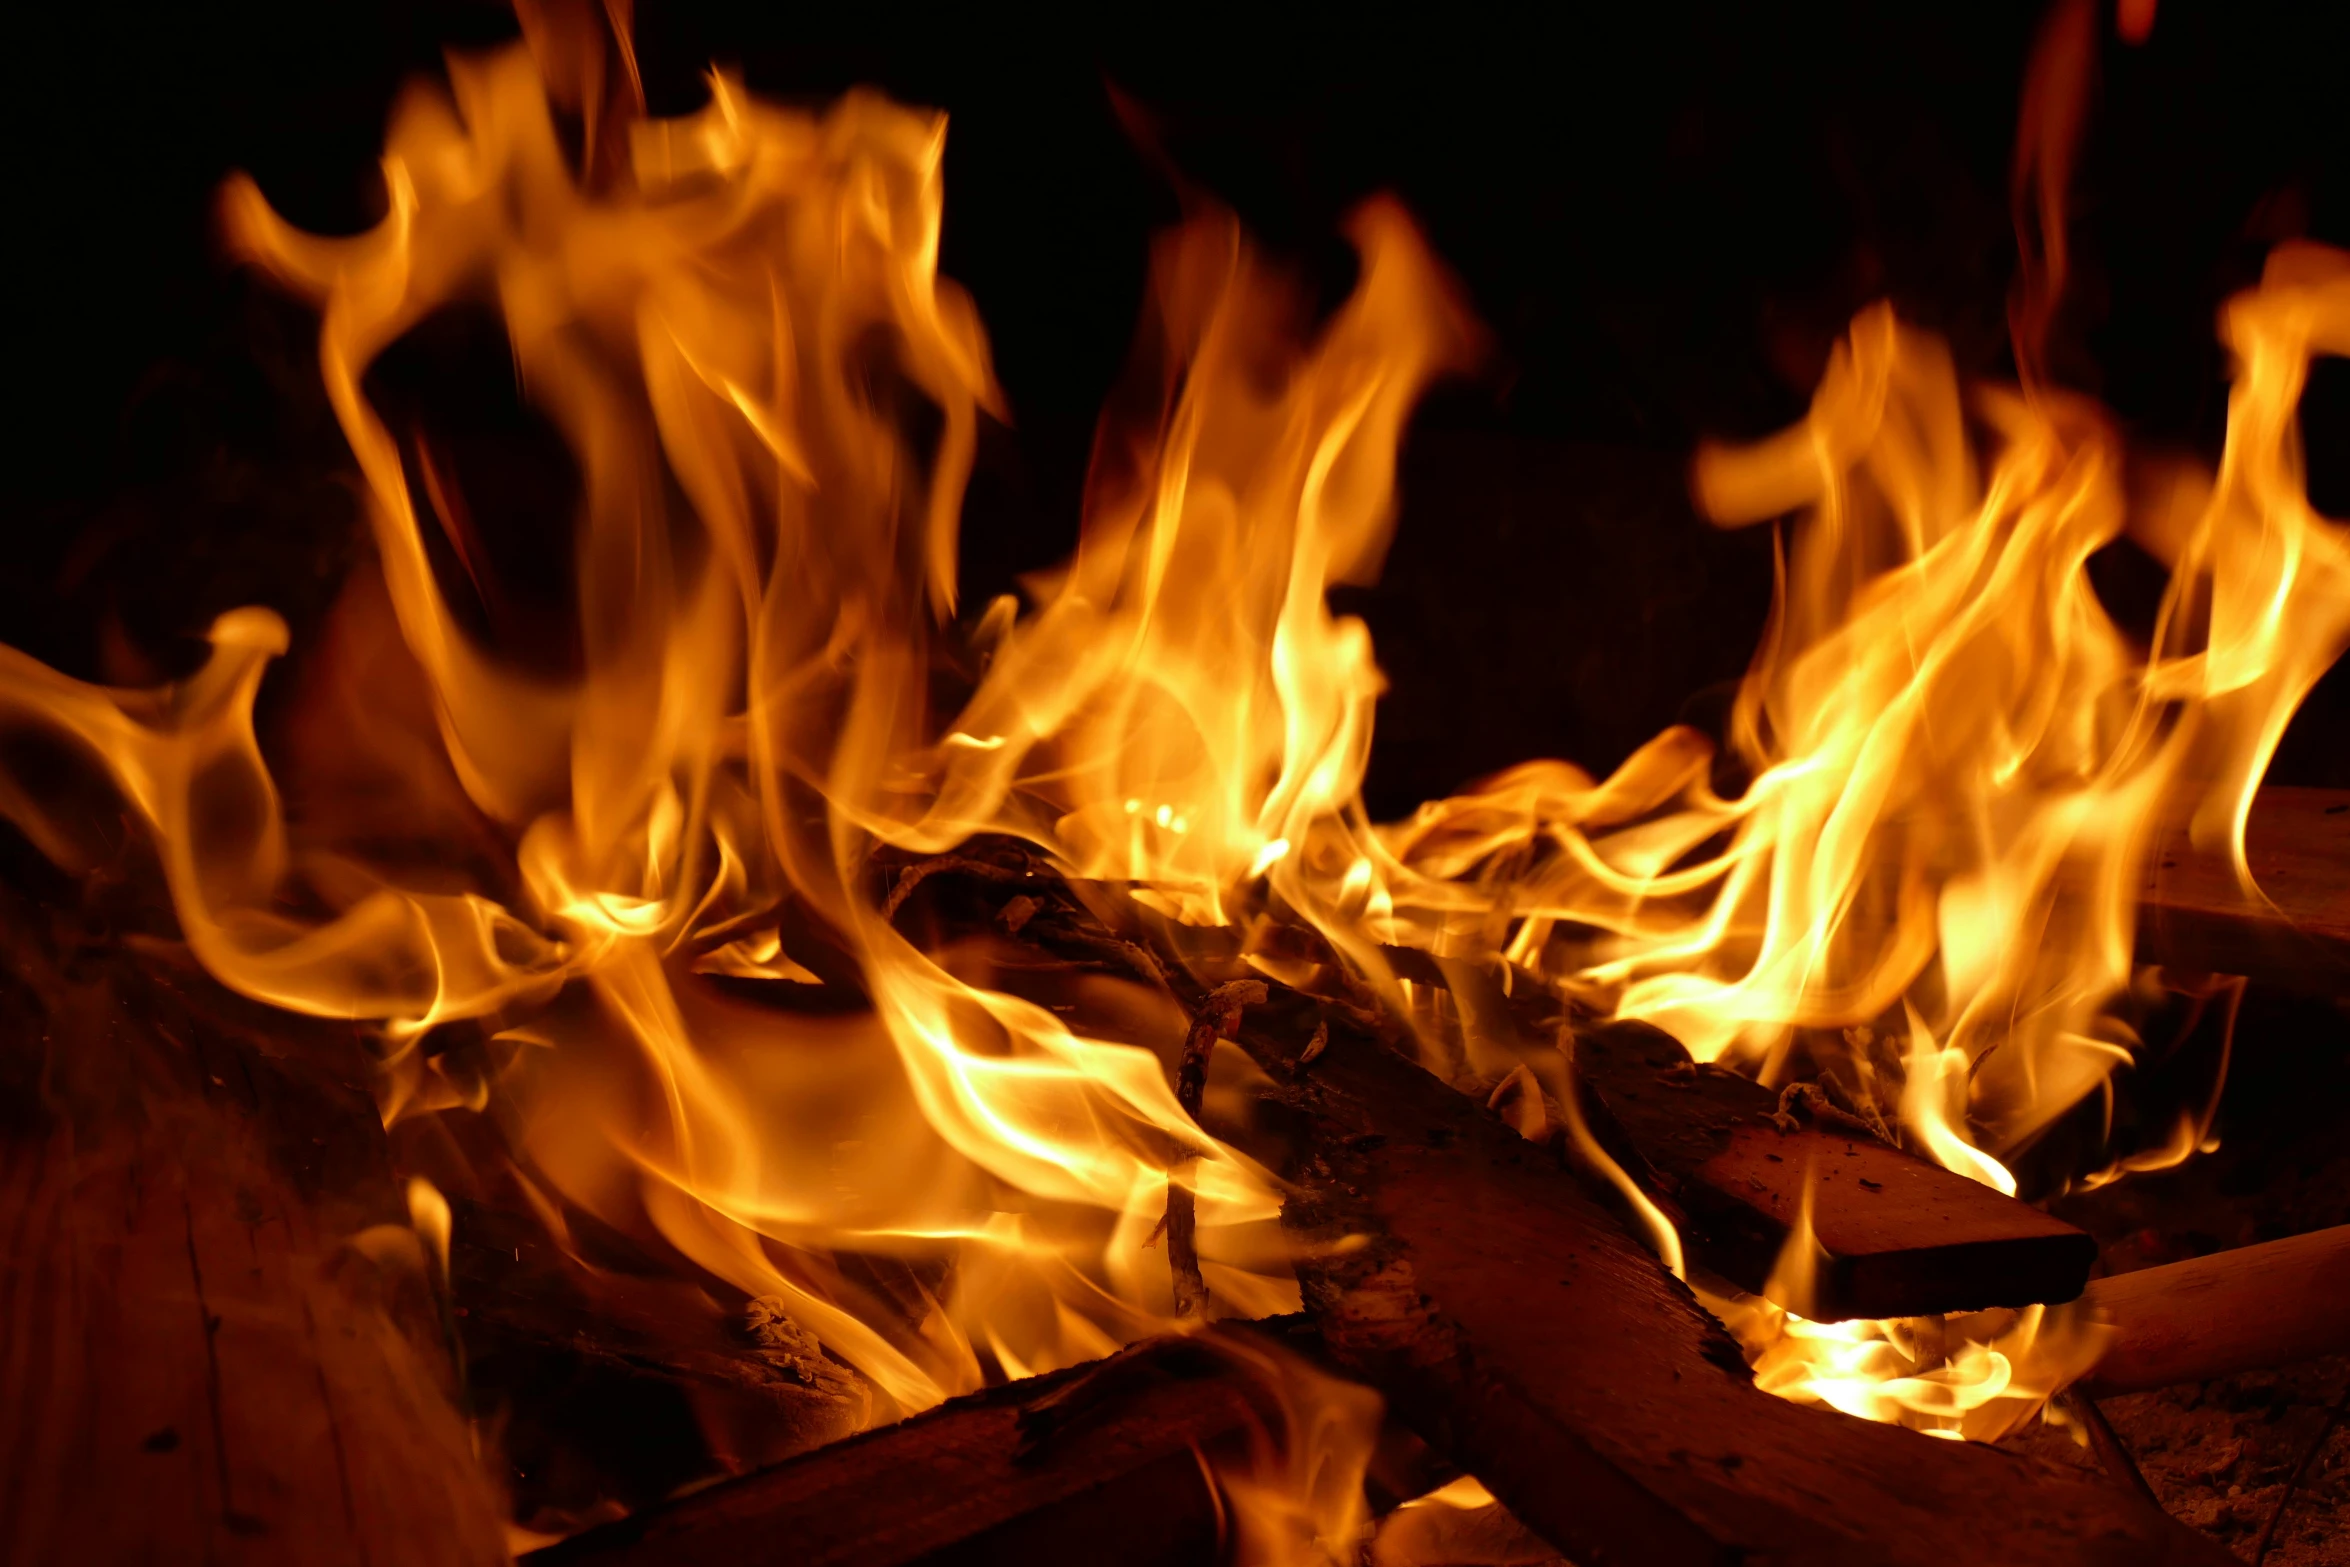 the  fire burns in a wooden burning pit